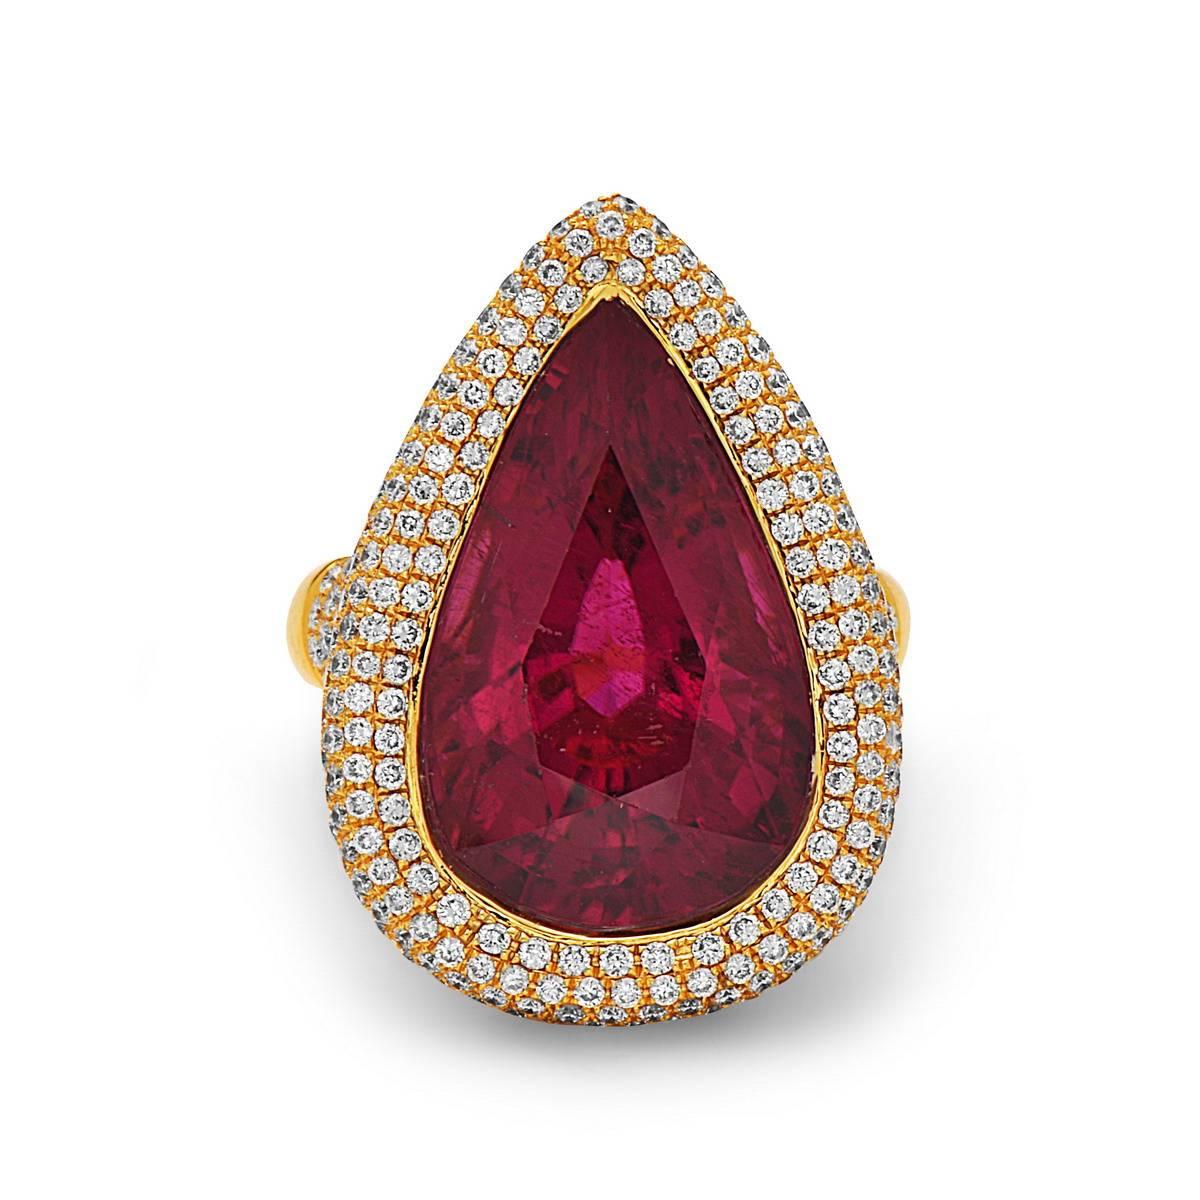 Majestic Pear shape Top Gem Quality Rubelite bezel set Cocktail Ring with pave diamonds around and on shank set in 18K yellow gold.
Ring Size: 6 (can be sized)

 
18kt:10.2g
Diamond:2.5ct
Rubilite:15ct